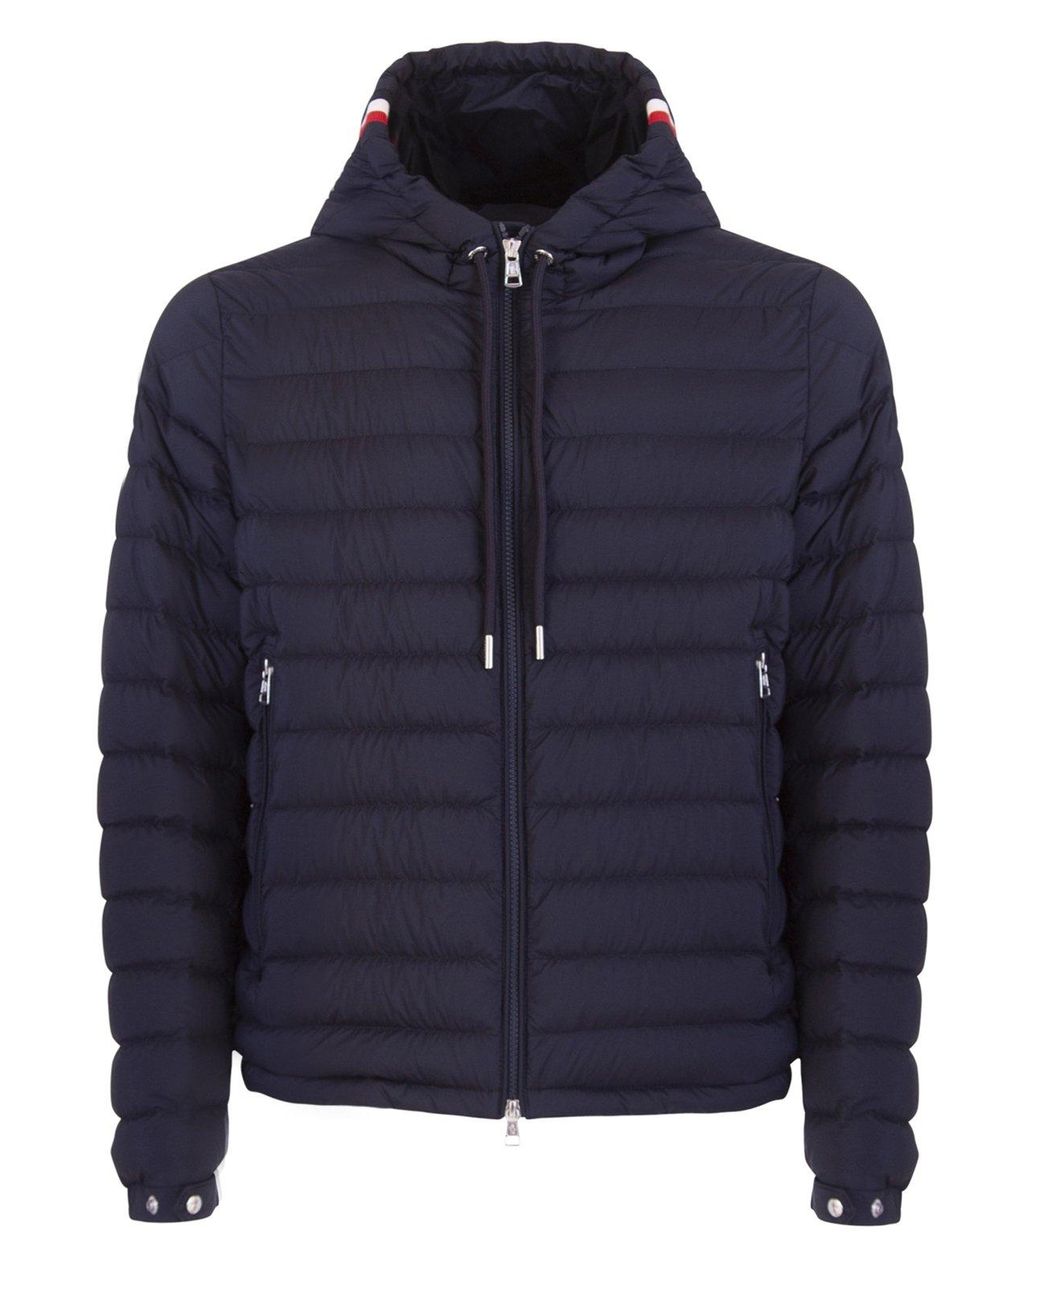 Moncler Synthetic Puffer Jacket in Blue for Men - Lyst